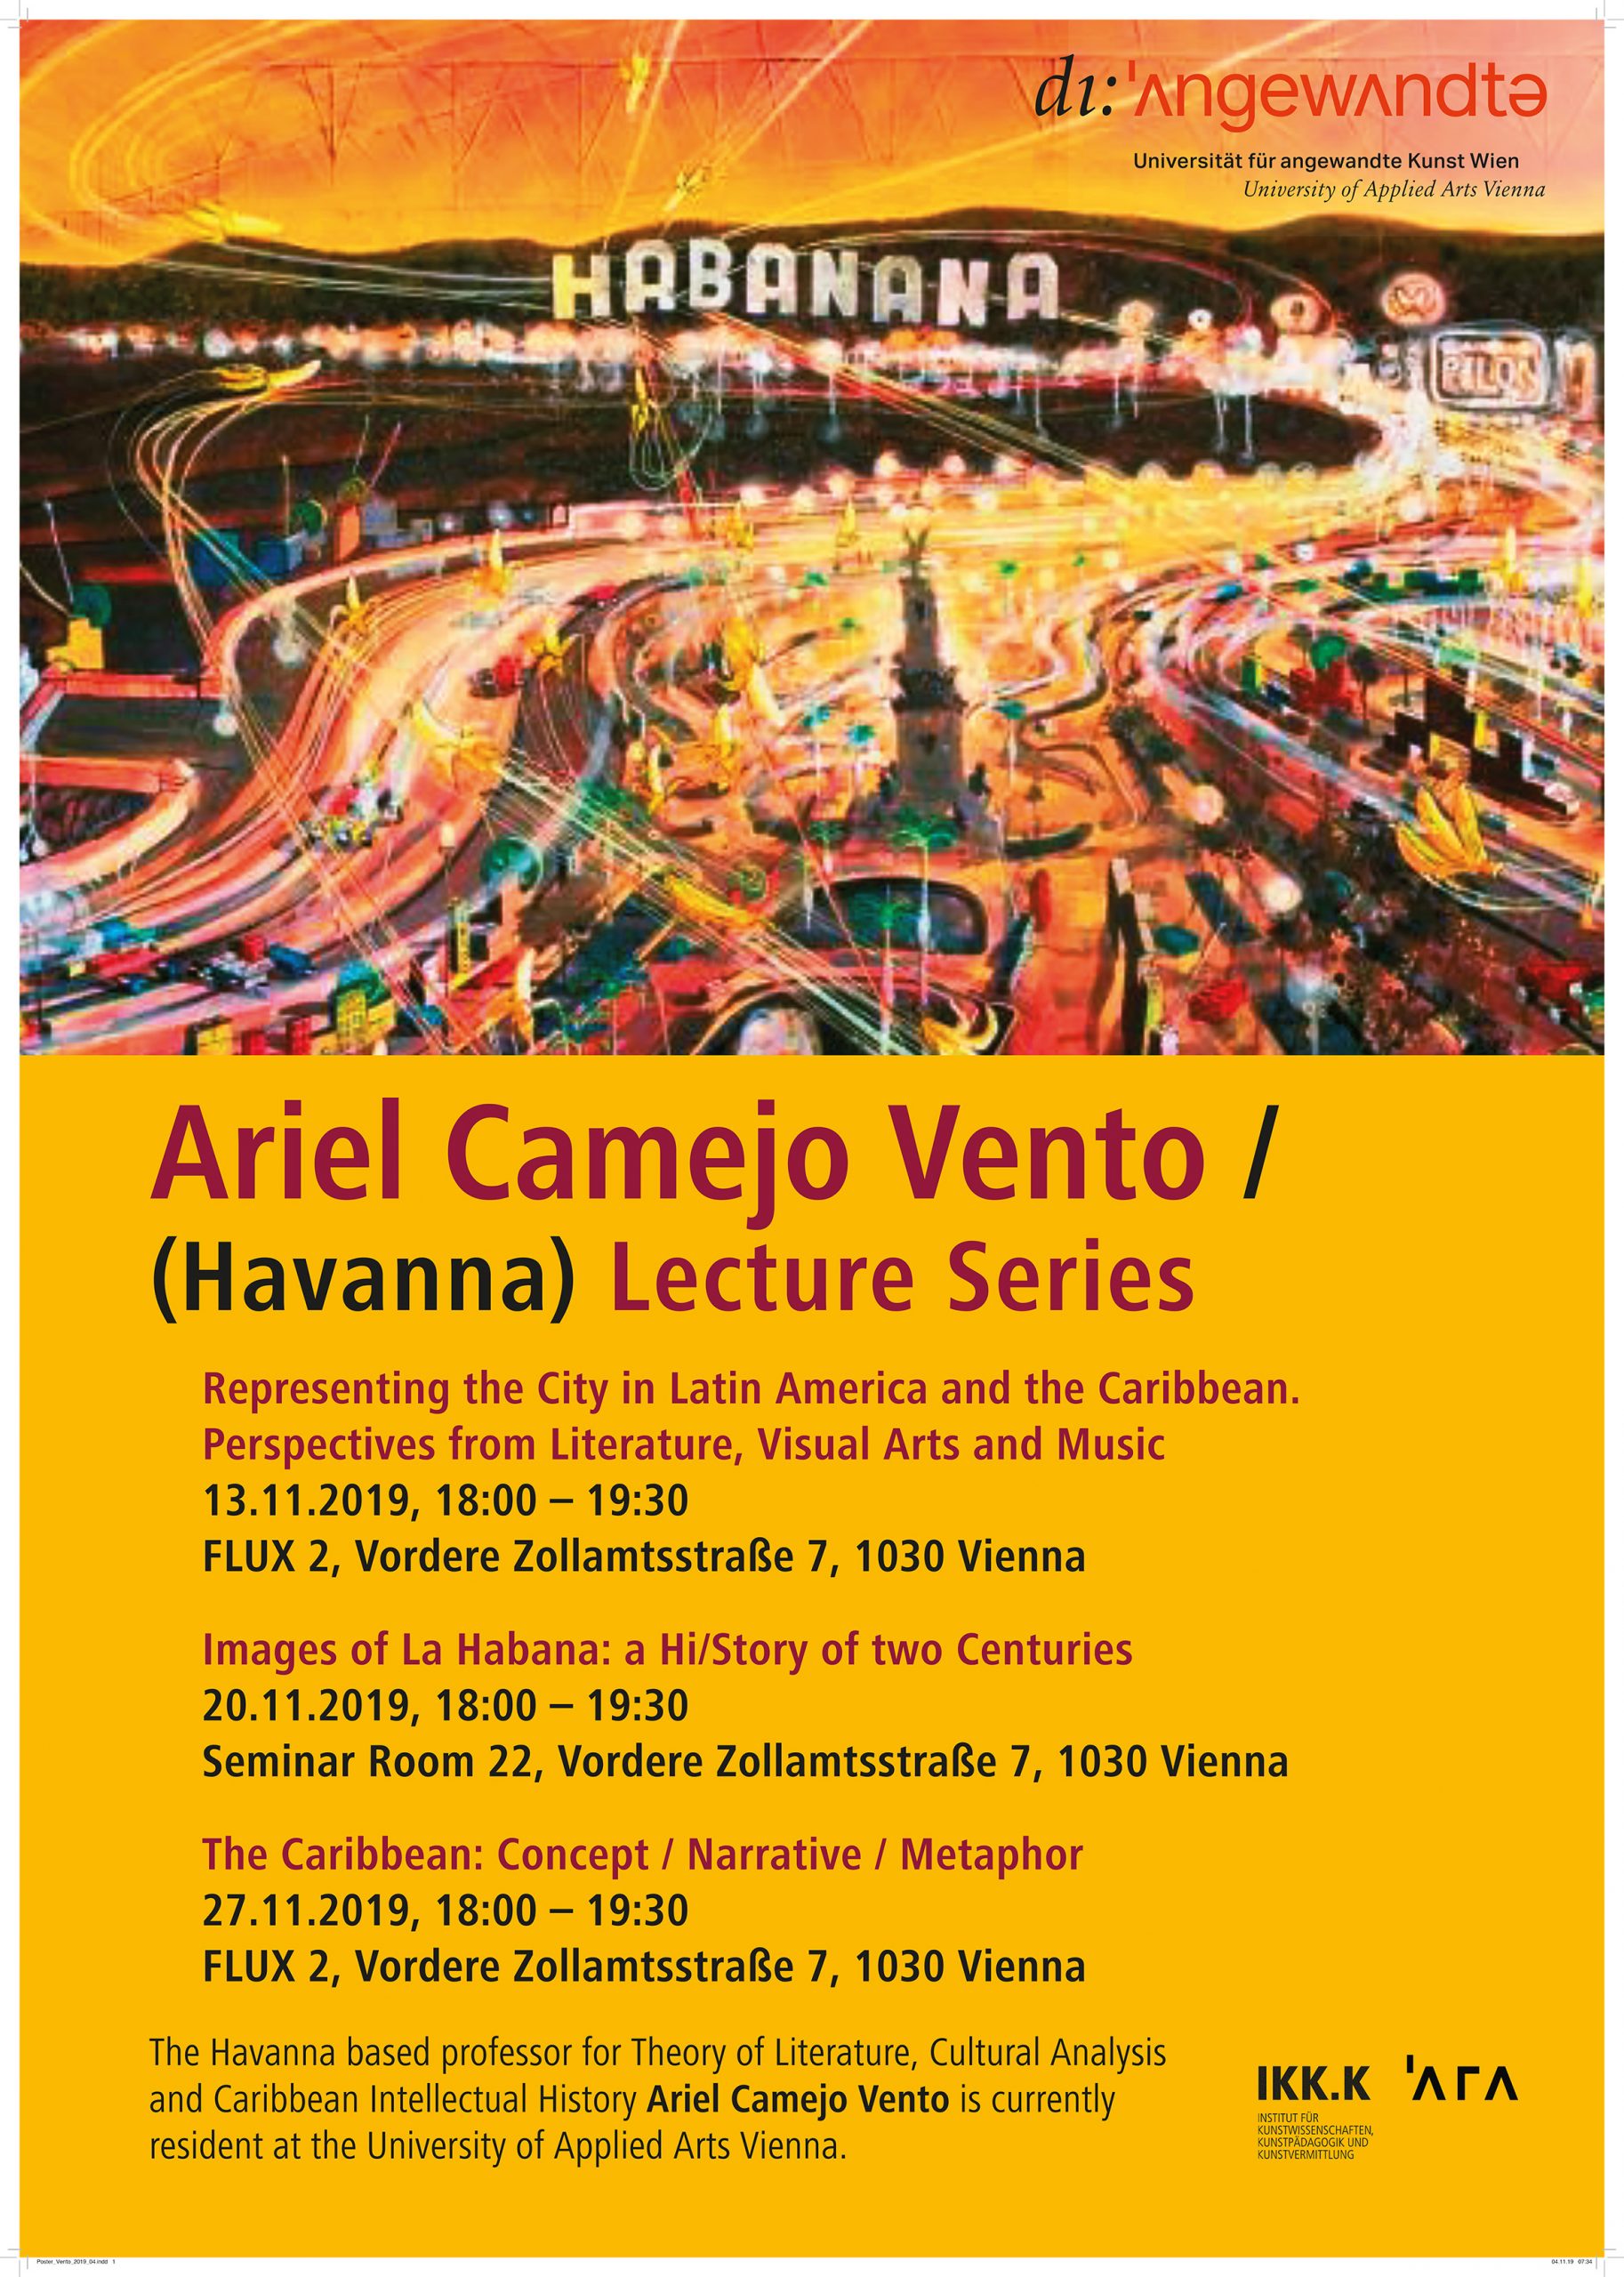 Ariel Camejo Vento: Images of La Habana - a Hi/Story of two Centuries